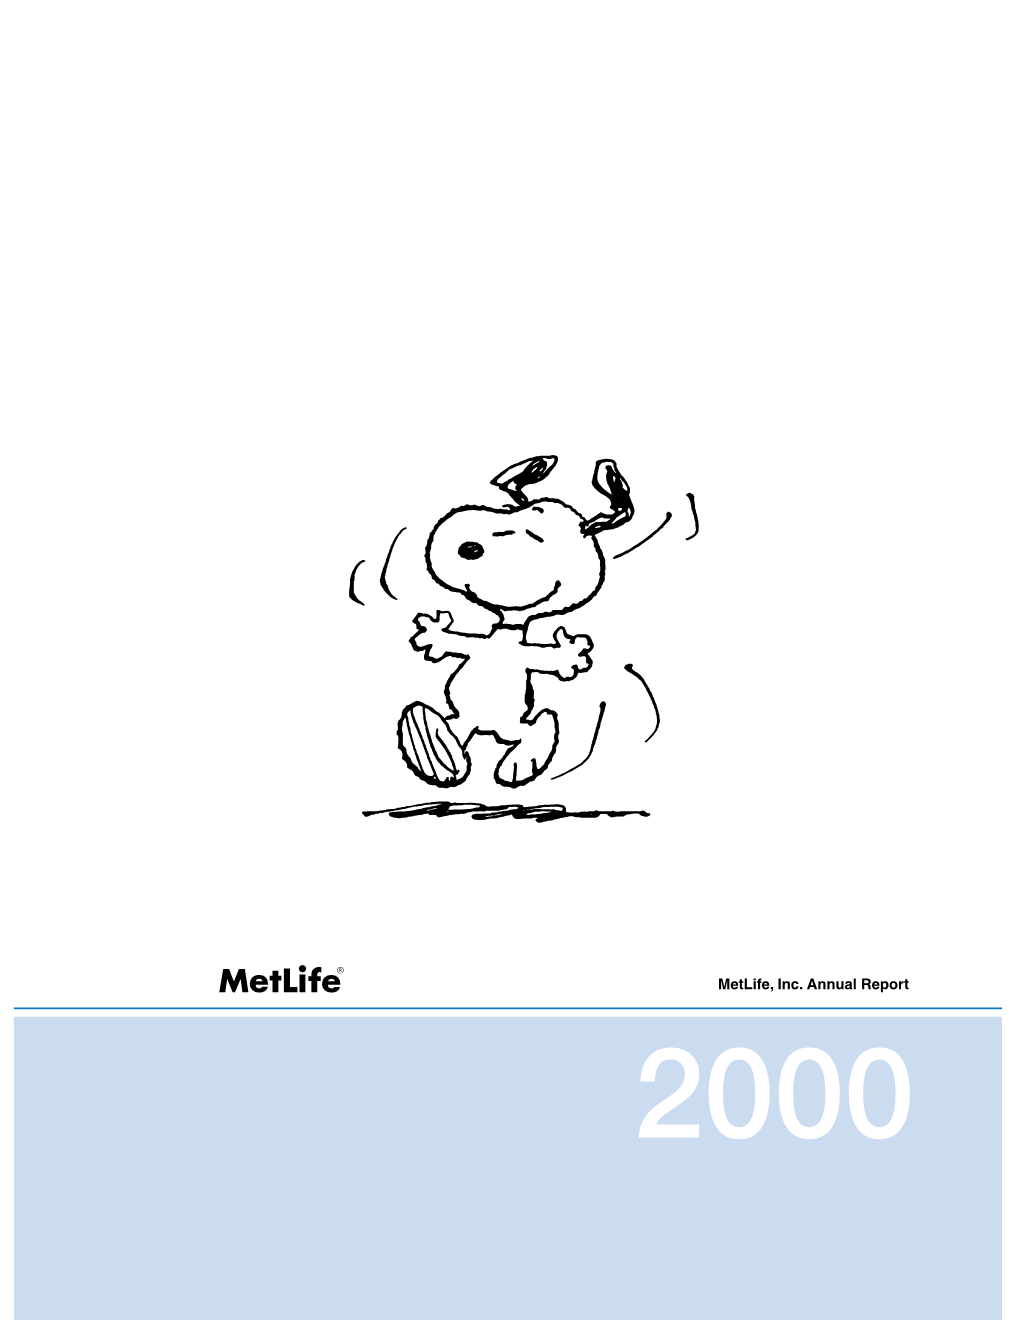 Metlife, Inc. Annual Report Chairman’S Letter